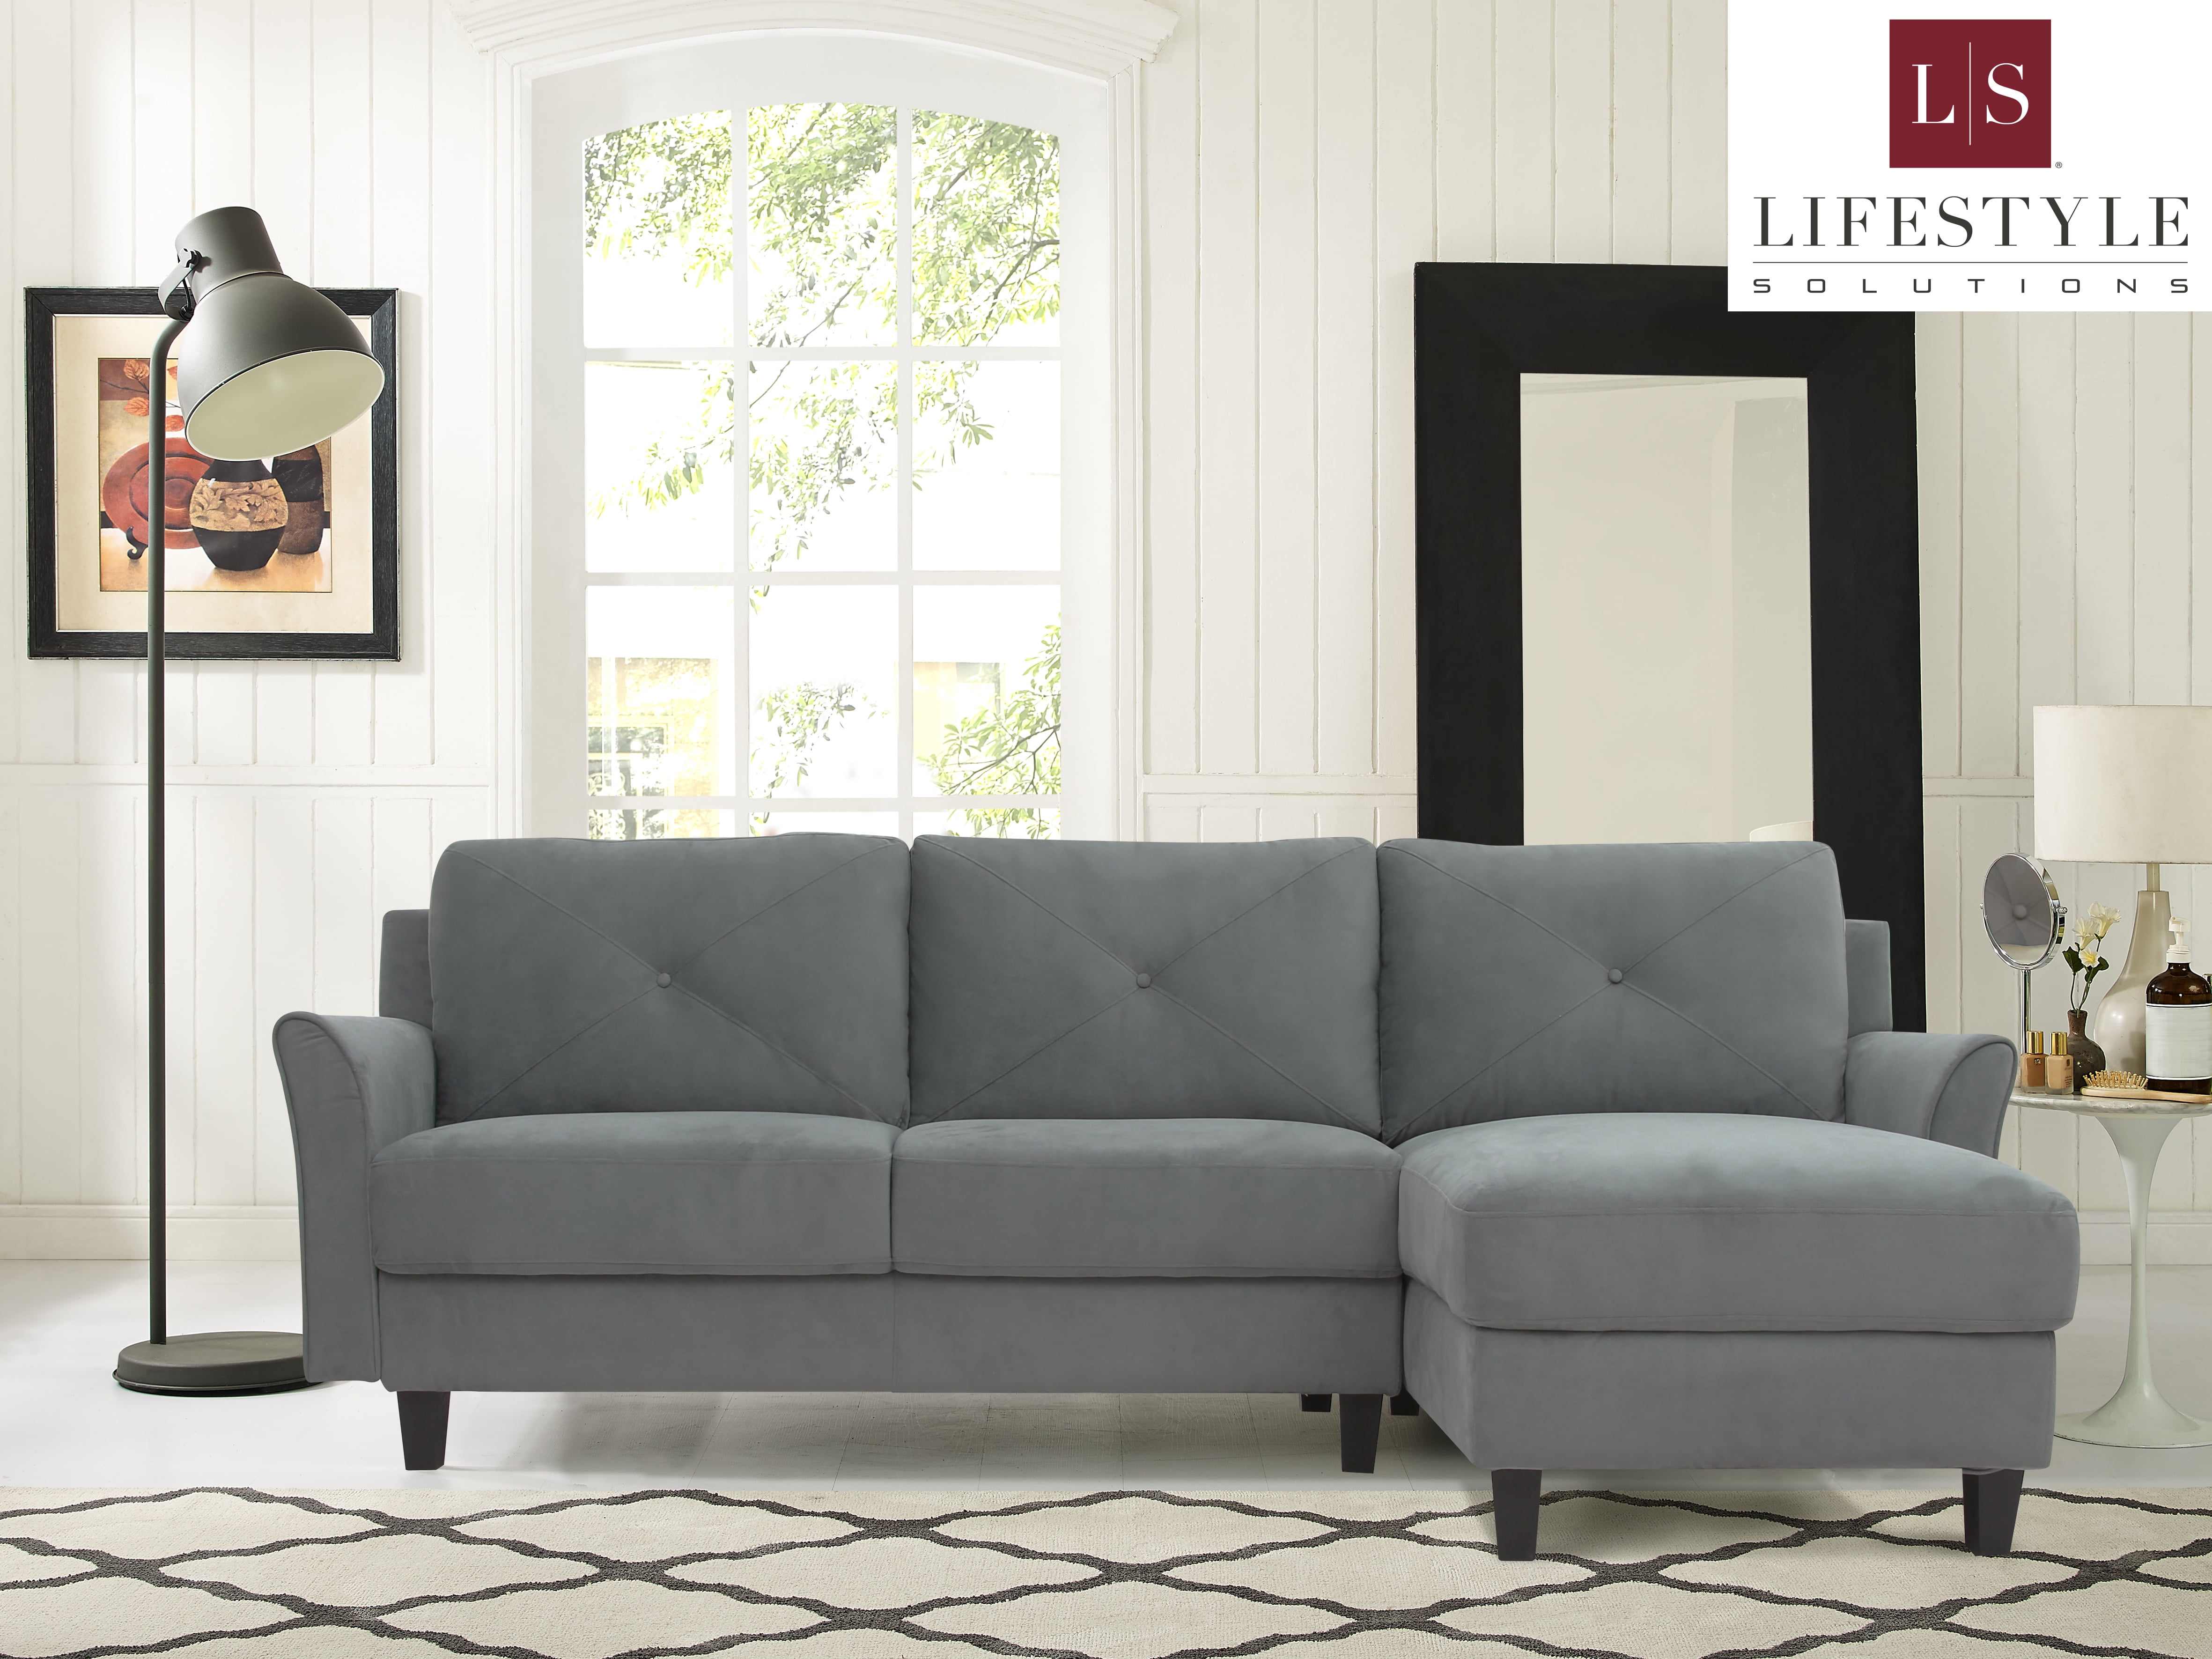 Lifestyle Solutions Taryn 3 Seat Sectional Sofa ...